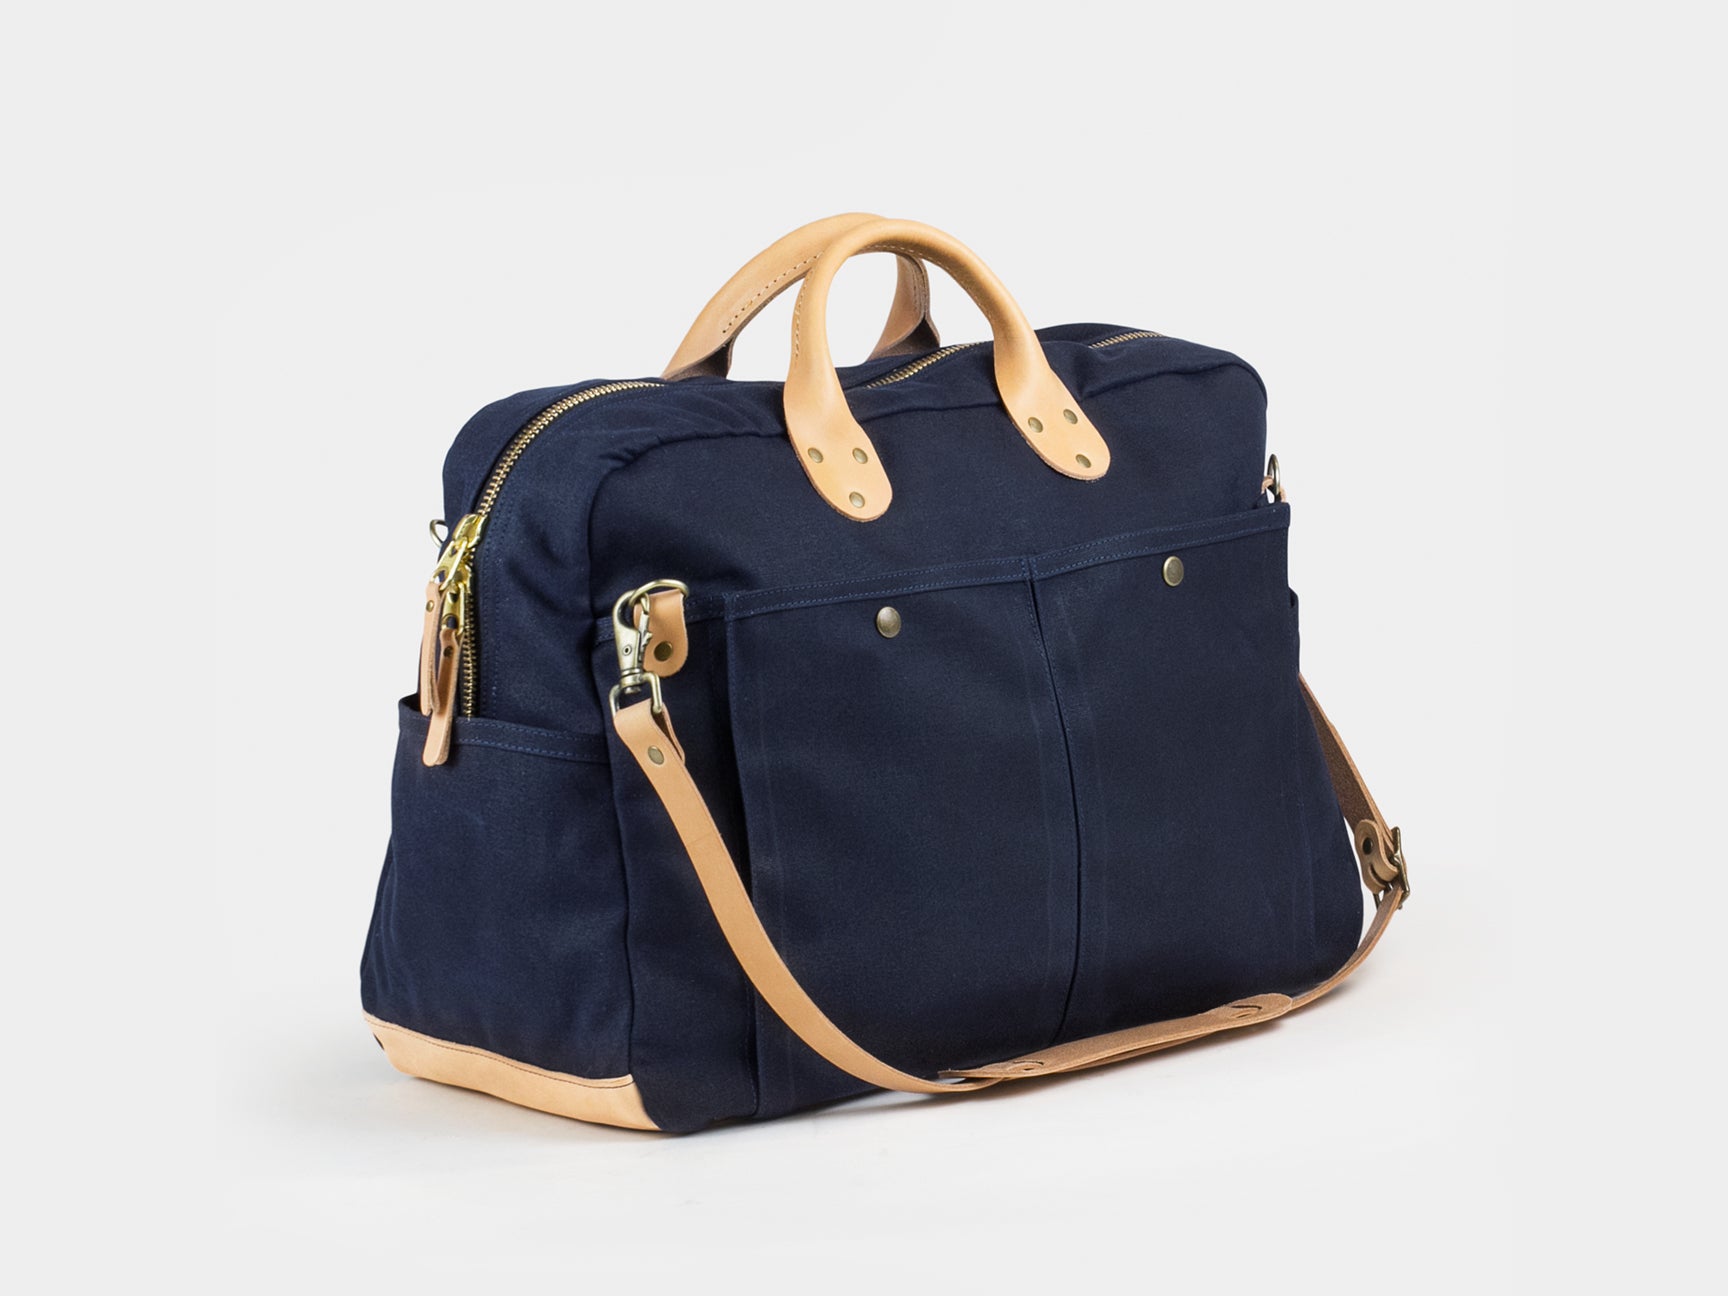 Winter Session Waxed Canvas Weekender Bag